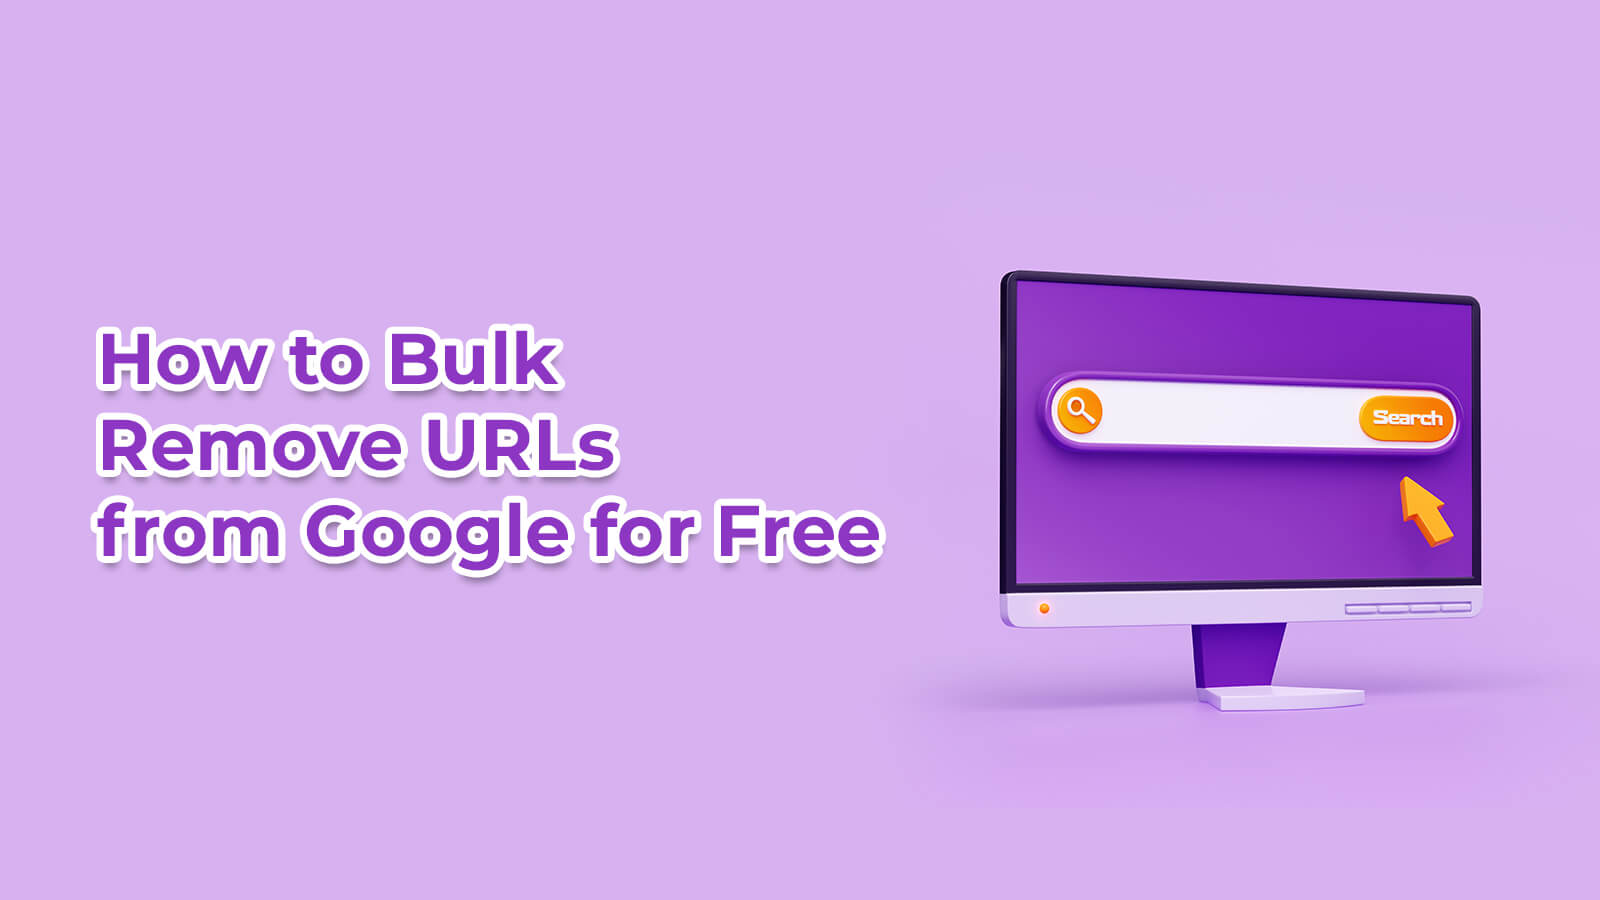 How to Bulk Remove URLs from Google for Free